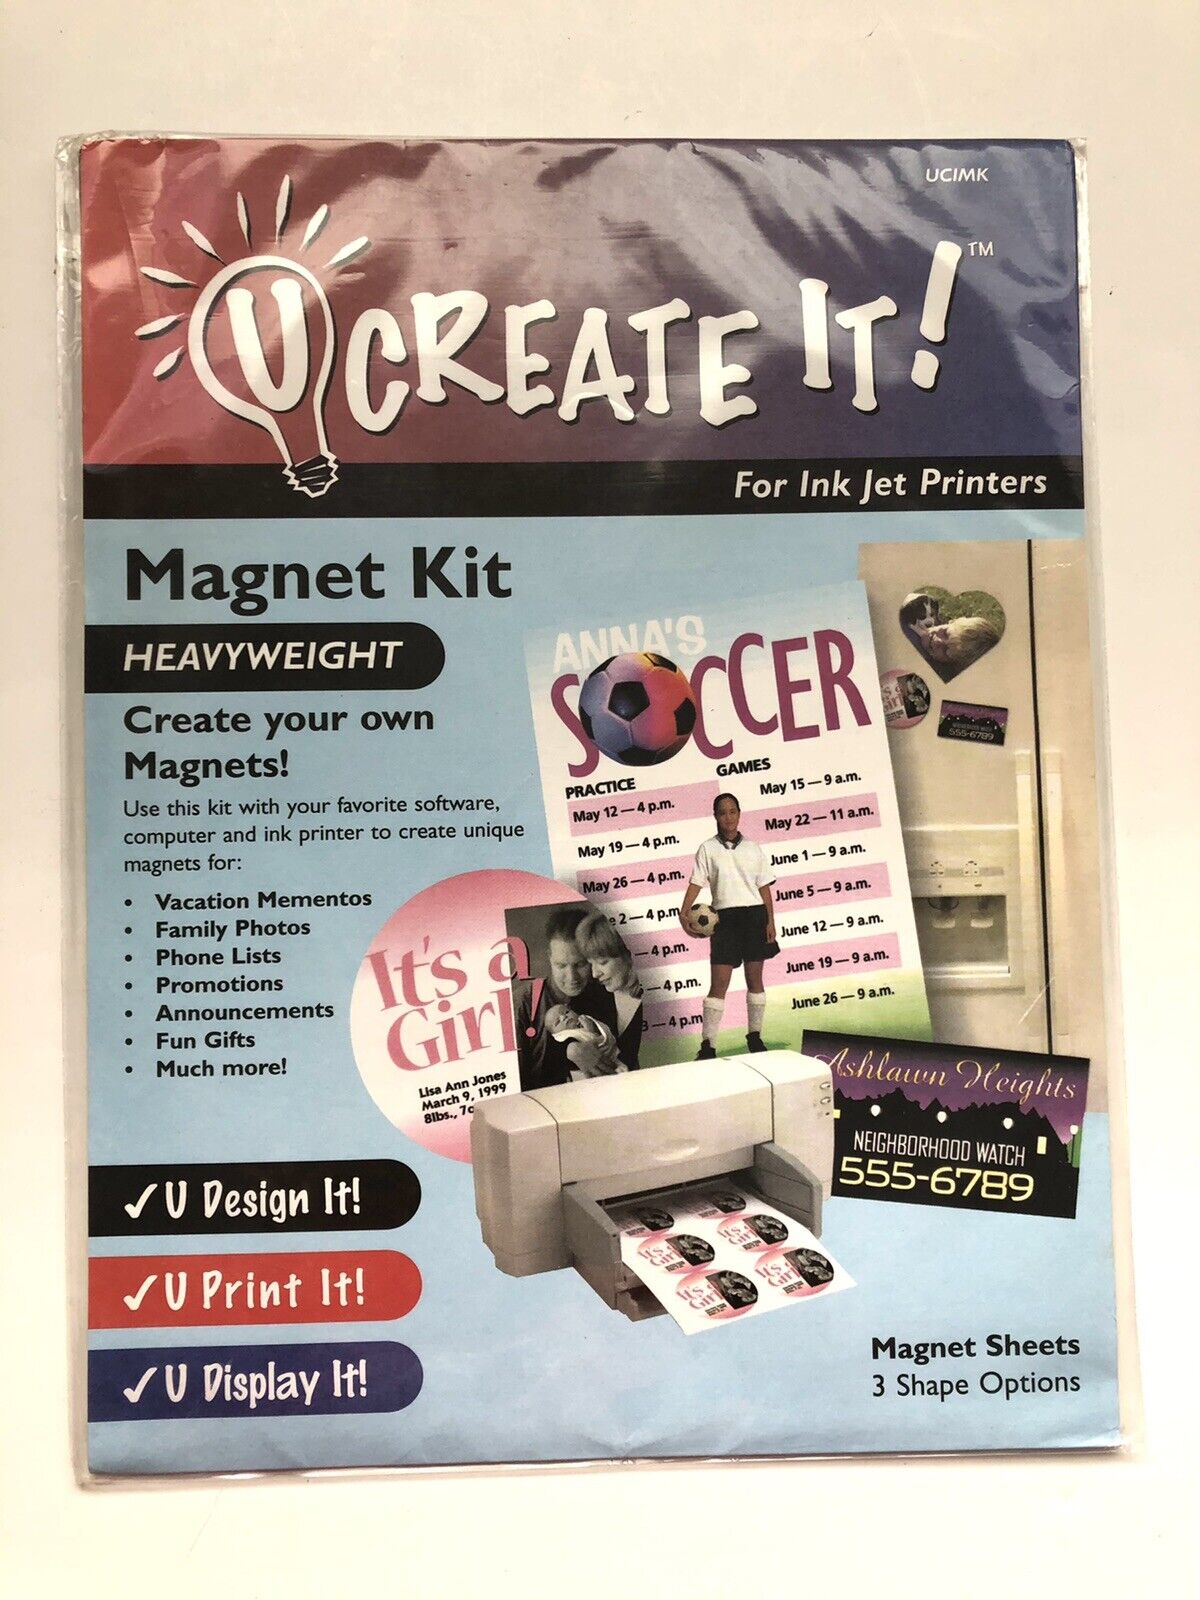 U Create It-Heavyweight Magnet Kit for Ink Jet Printers-CREATE YOUR OWN MAGNETS